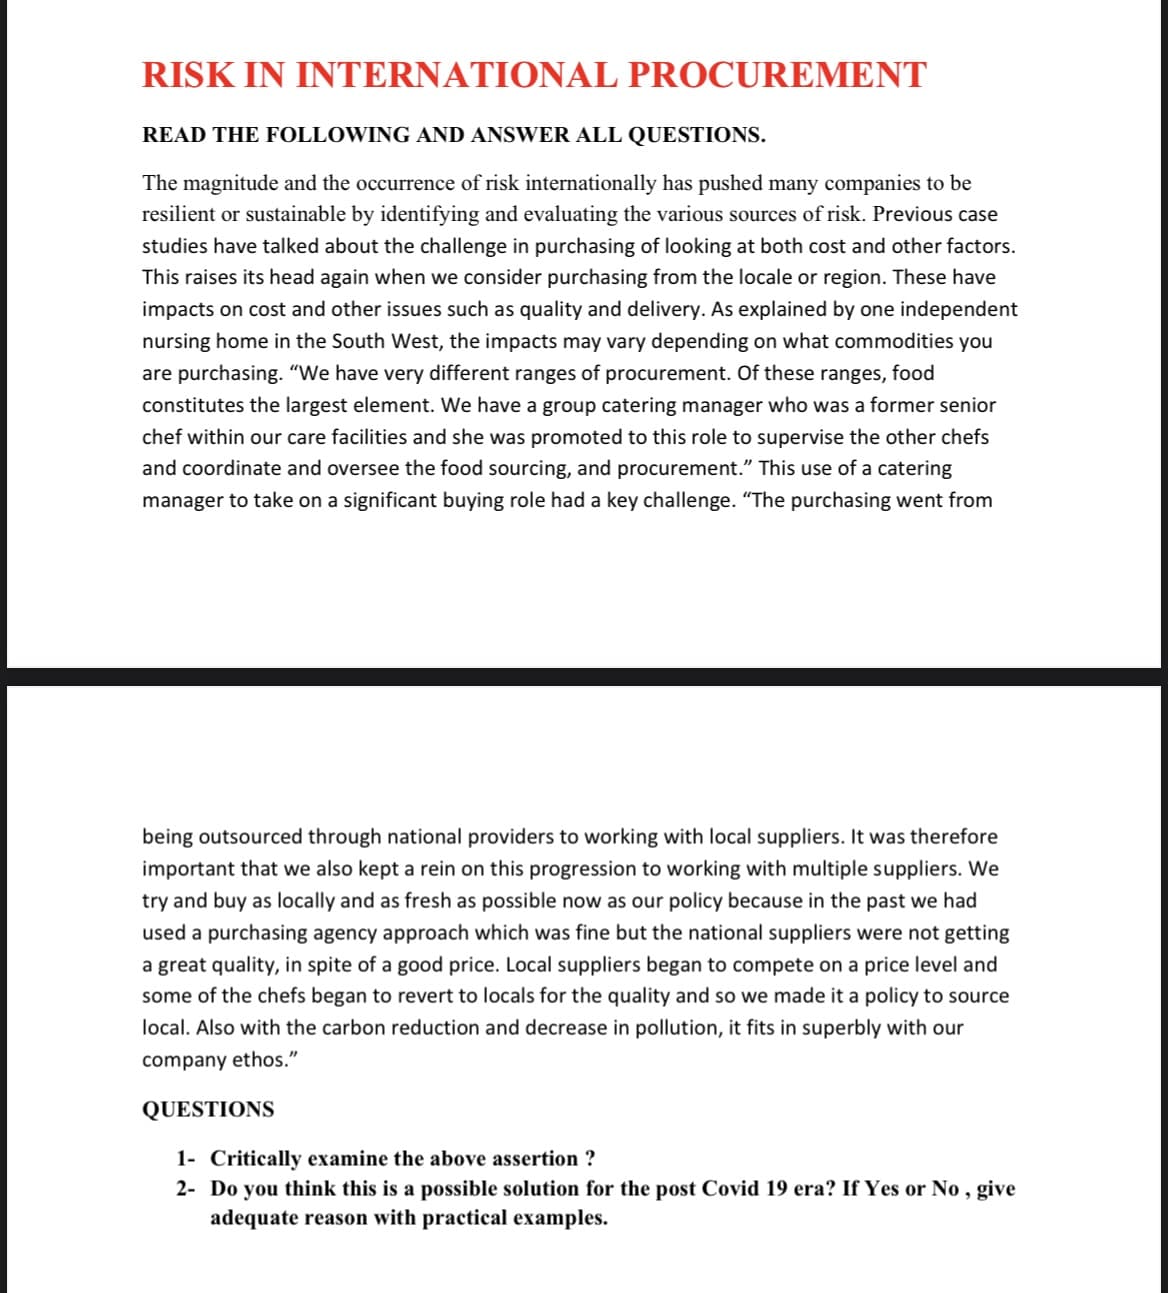 RISK IN INTERNATIONAL PROCUREMENT
READ THE FOLLOWING AND ANSWER ALL QUESTIONS.
The magnitude and the occurrence of risk internationally has pushed many companies to be
resilient or sustainable by identifying and evaluating the various sources of risk. Previous case
studies have talked about the challenge in purchasing of looking at both cost and other factors.
This raises its head again when we consider purchasing from the locale or region. These have
impacts on cost and other issues such as quality and delivery. As explained by one independent
nursing home in the South West, the impacts may vary depending on what commodities you
are purchasing. "We have very different ranges of procurement. Of these ranges, food
constitutes the largest element. We have a group catering manager who was a former senior
chef within our care facilities and she was promoted to this role to supervise the other chefs
and coordinate and oversee the food sourcing, and procurement." This use of a catering
manager to take on a significant buying role had a key challenge. "The purchasing went from
being outsourced through national providers to working with local suppliers. It was therefore
important that we also kept a rein on this progression to working with multiple suppliers. We
try and buy as locally and as fresh as possible now as our policy because in the past we had
used a purchasing agency approach which was fine but the national suppliers were not getting
a great quality, in spite of a good price. Local suppliers began to compete on a price level and
some of the chefs began to revert to locals for the quality and so we made it a policy to source
local. Also with the carbon reduction and decrease in pollution, it fits in superbly with our
company ethos."
QUESTIONS
1- Critically examine the above assertion ?
2- Do you think this is a possible solution for the post Covid 19 era? If Yes or No, give
adequate reason with practical examples.